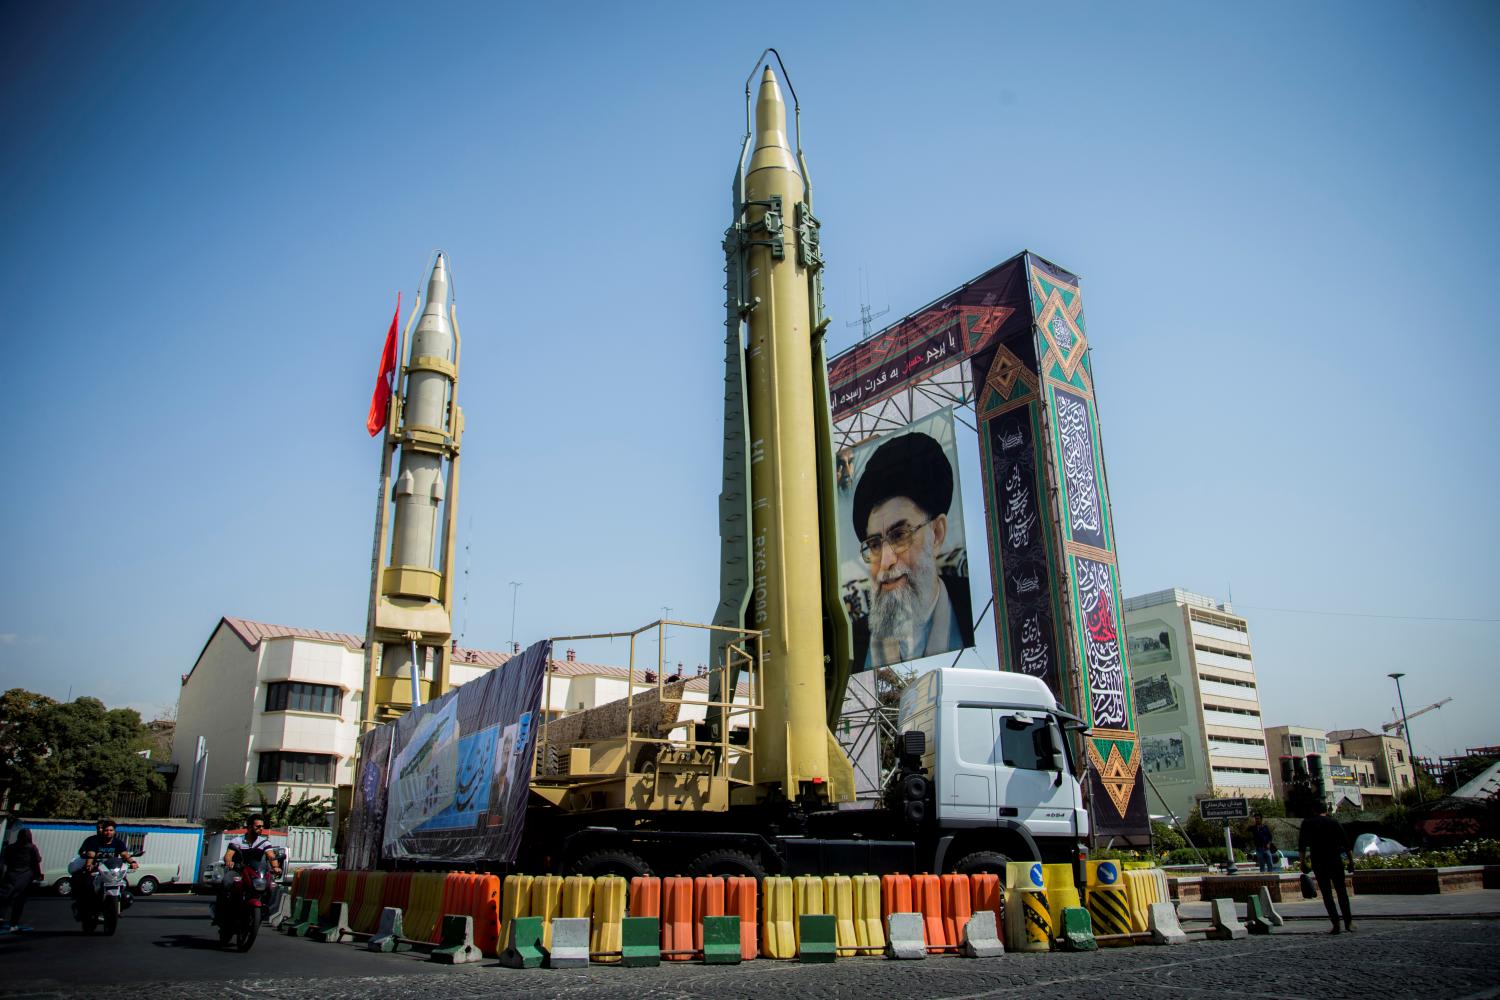 FILE PHOTO: A display featuring missiles and a portrait of Iran's Supreme Leader Ayatollah Ali Khamenei is seen at Baharestan Square in Tehran, Iran September 27, 2017. Picture taken September 27, 2017. Nazanin Tabatabaee Yazdi